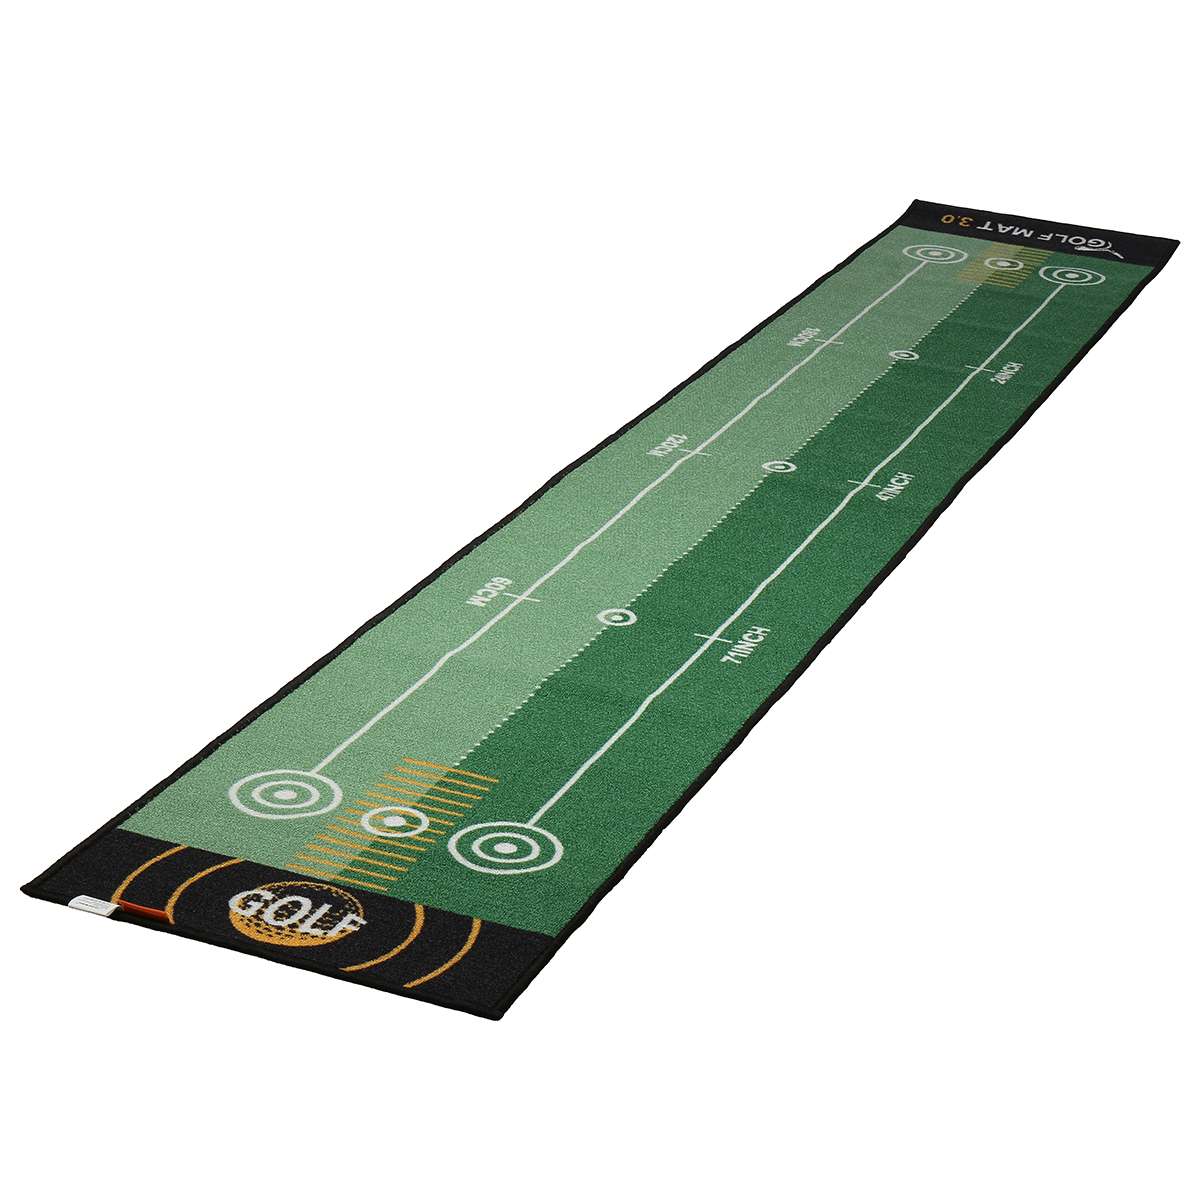 118inch Indoor Training Golf Putting Mat Golf Clubs Golf Training Tools Smooth Practice Putting Carpet For Indoor Home Office